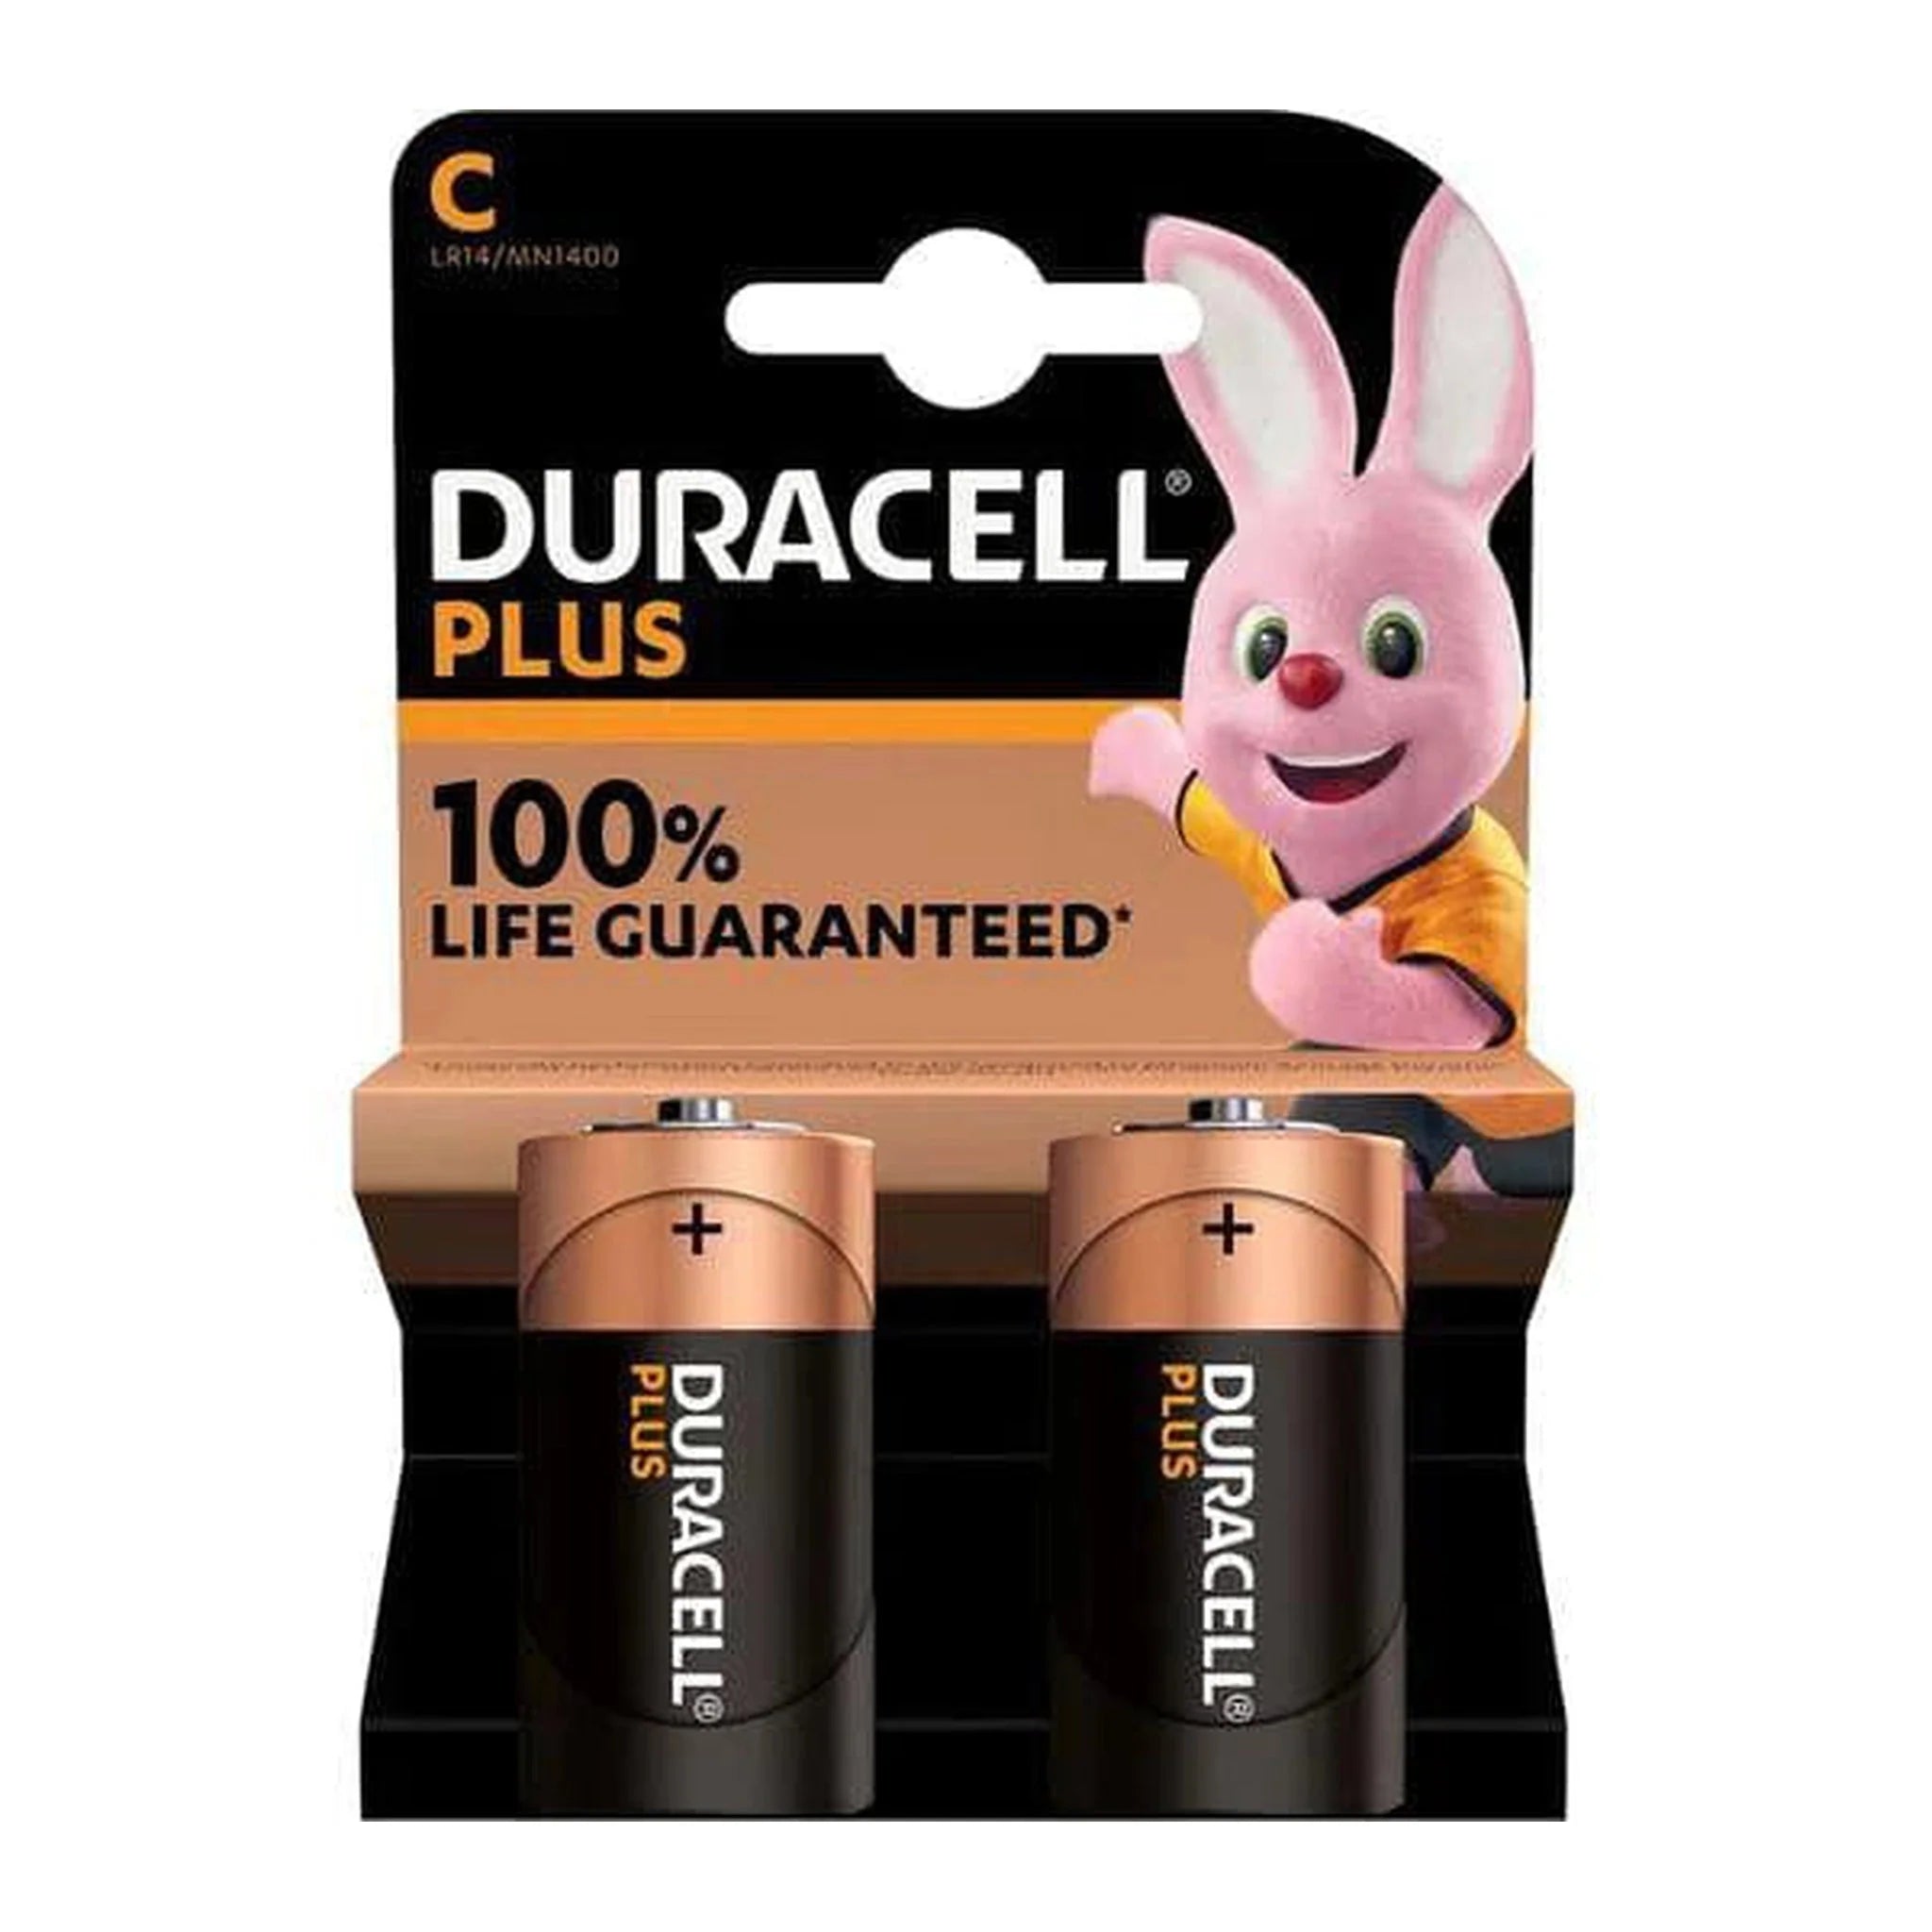 DURACELL Plus C Alkaline Batteries - Pack of 2 - Kids Party Craft